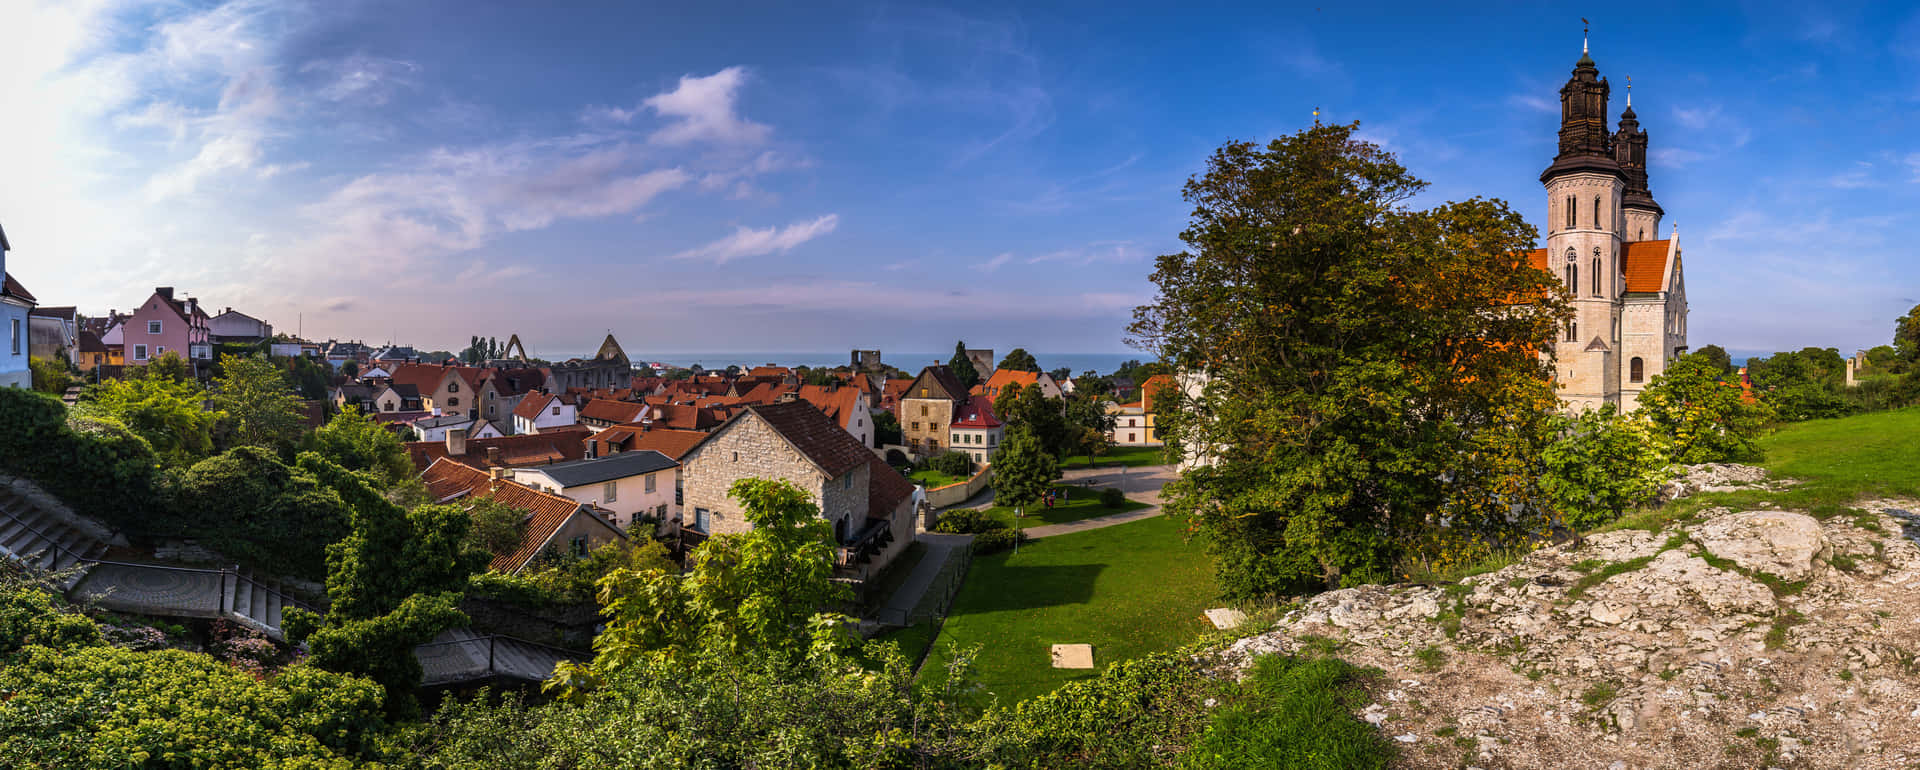 Visby Panoramic View Sweden Wallpaper